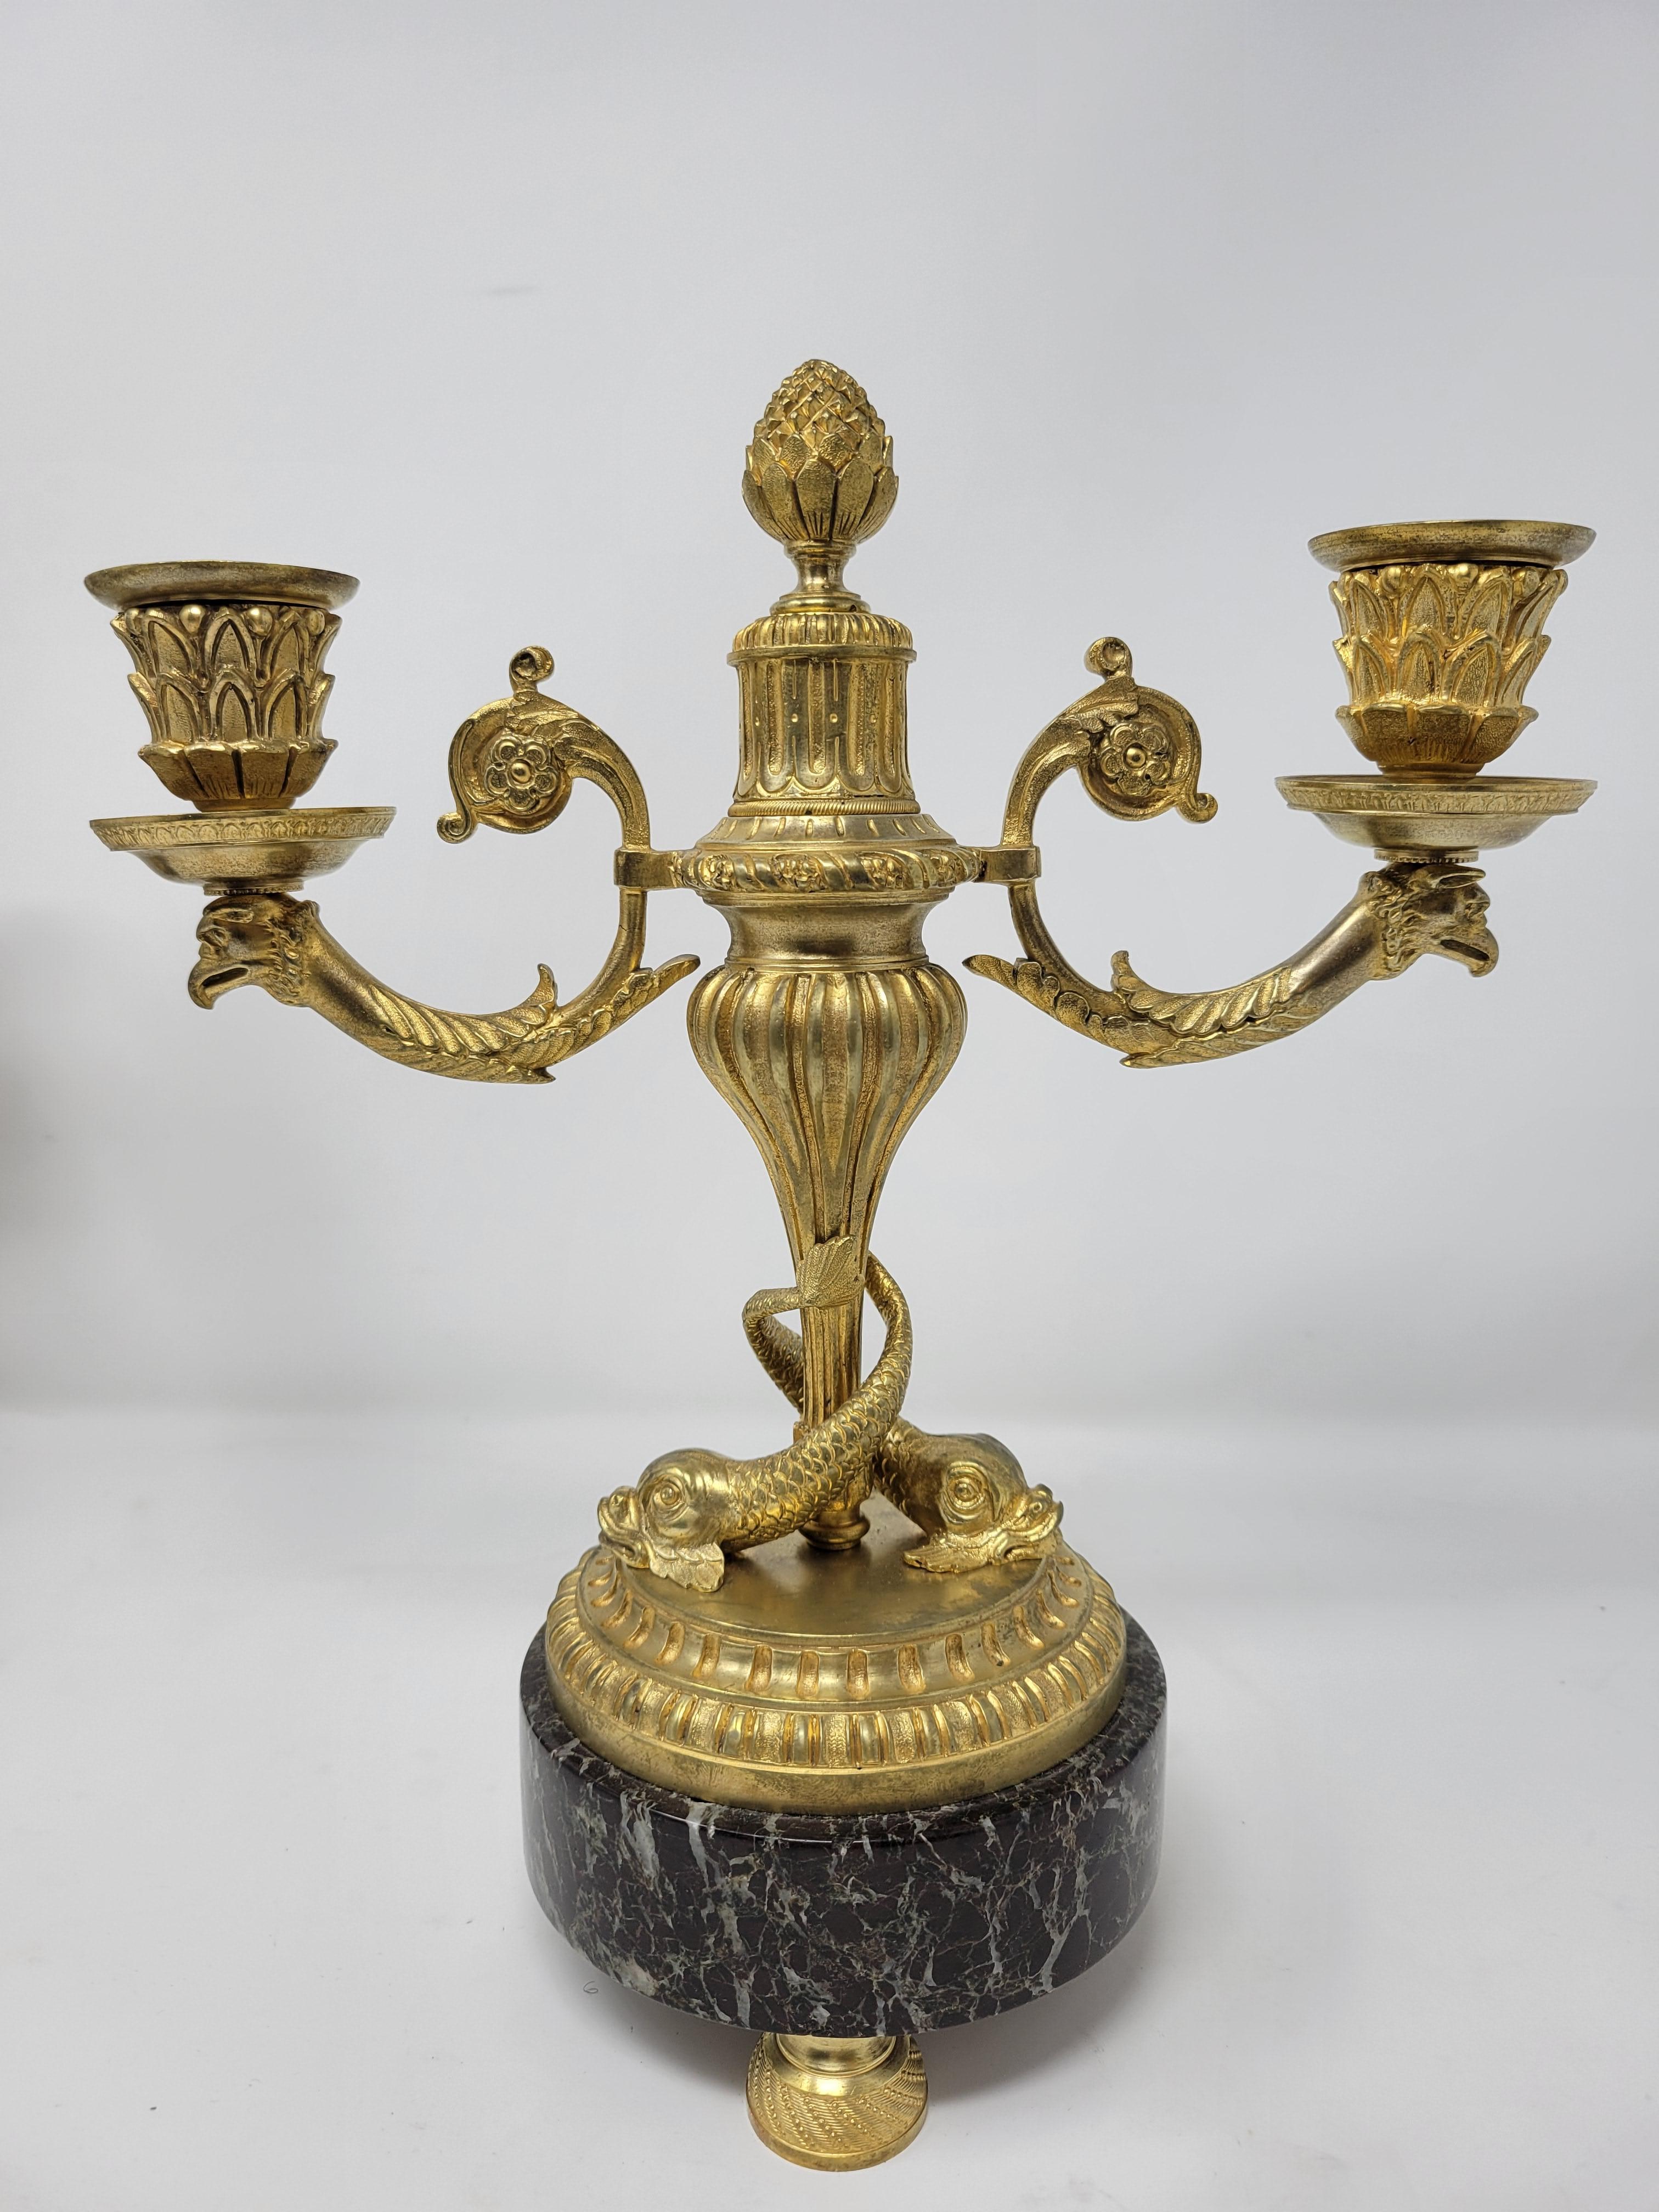 These candelabra are pleasing to the eye and also richly cast.